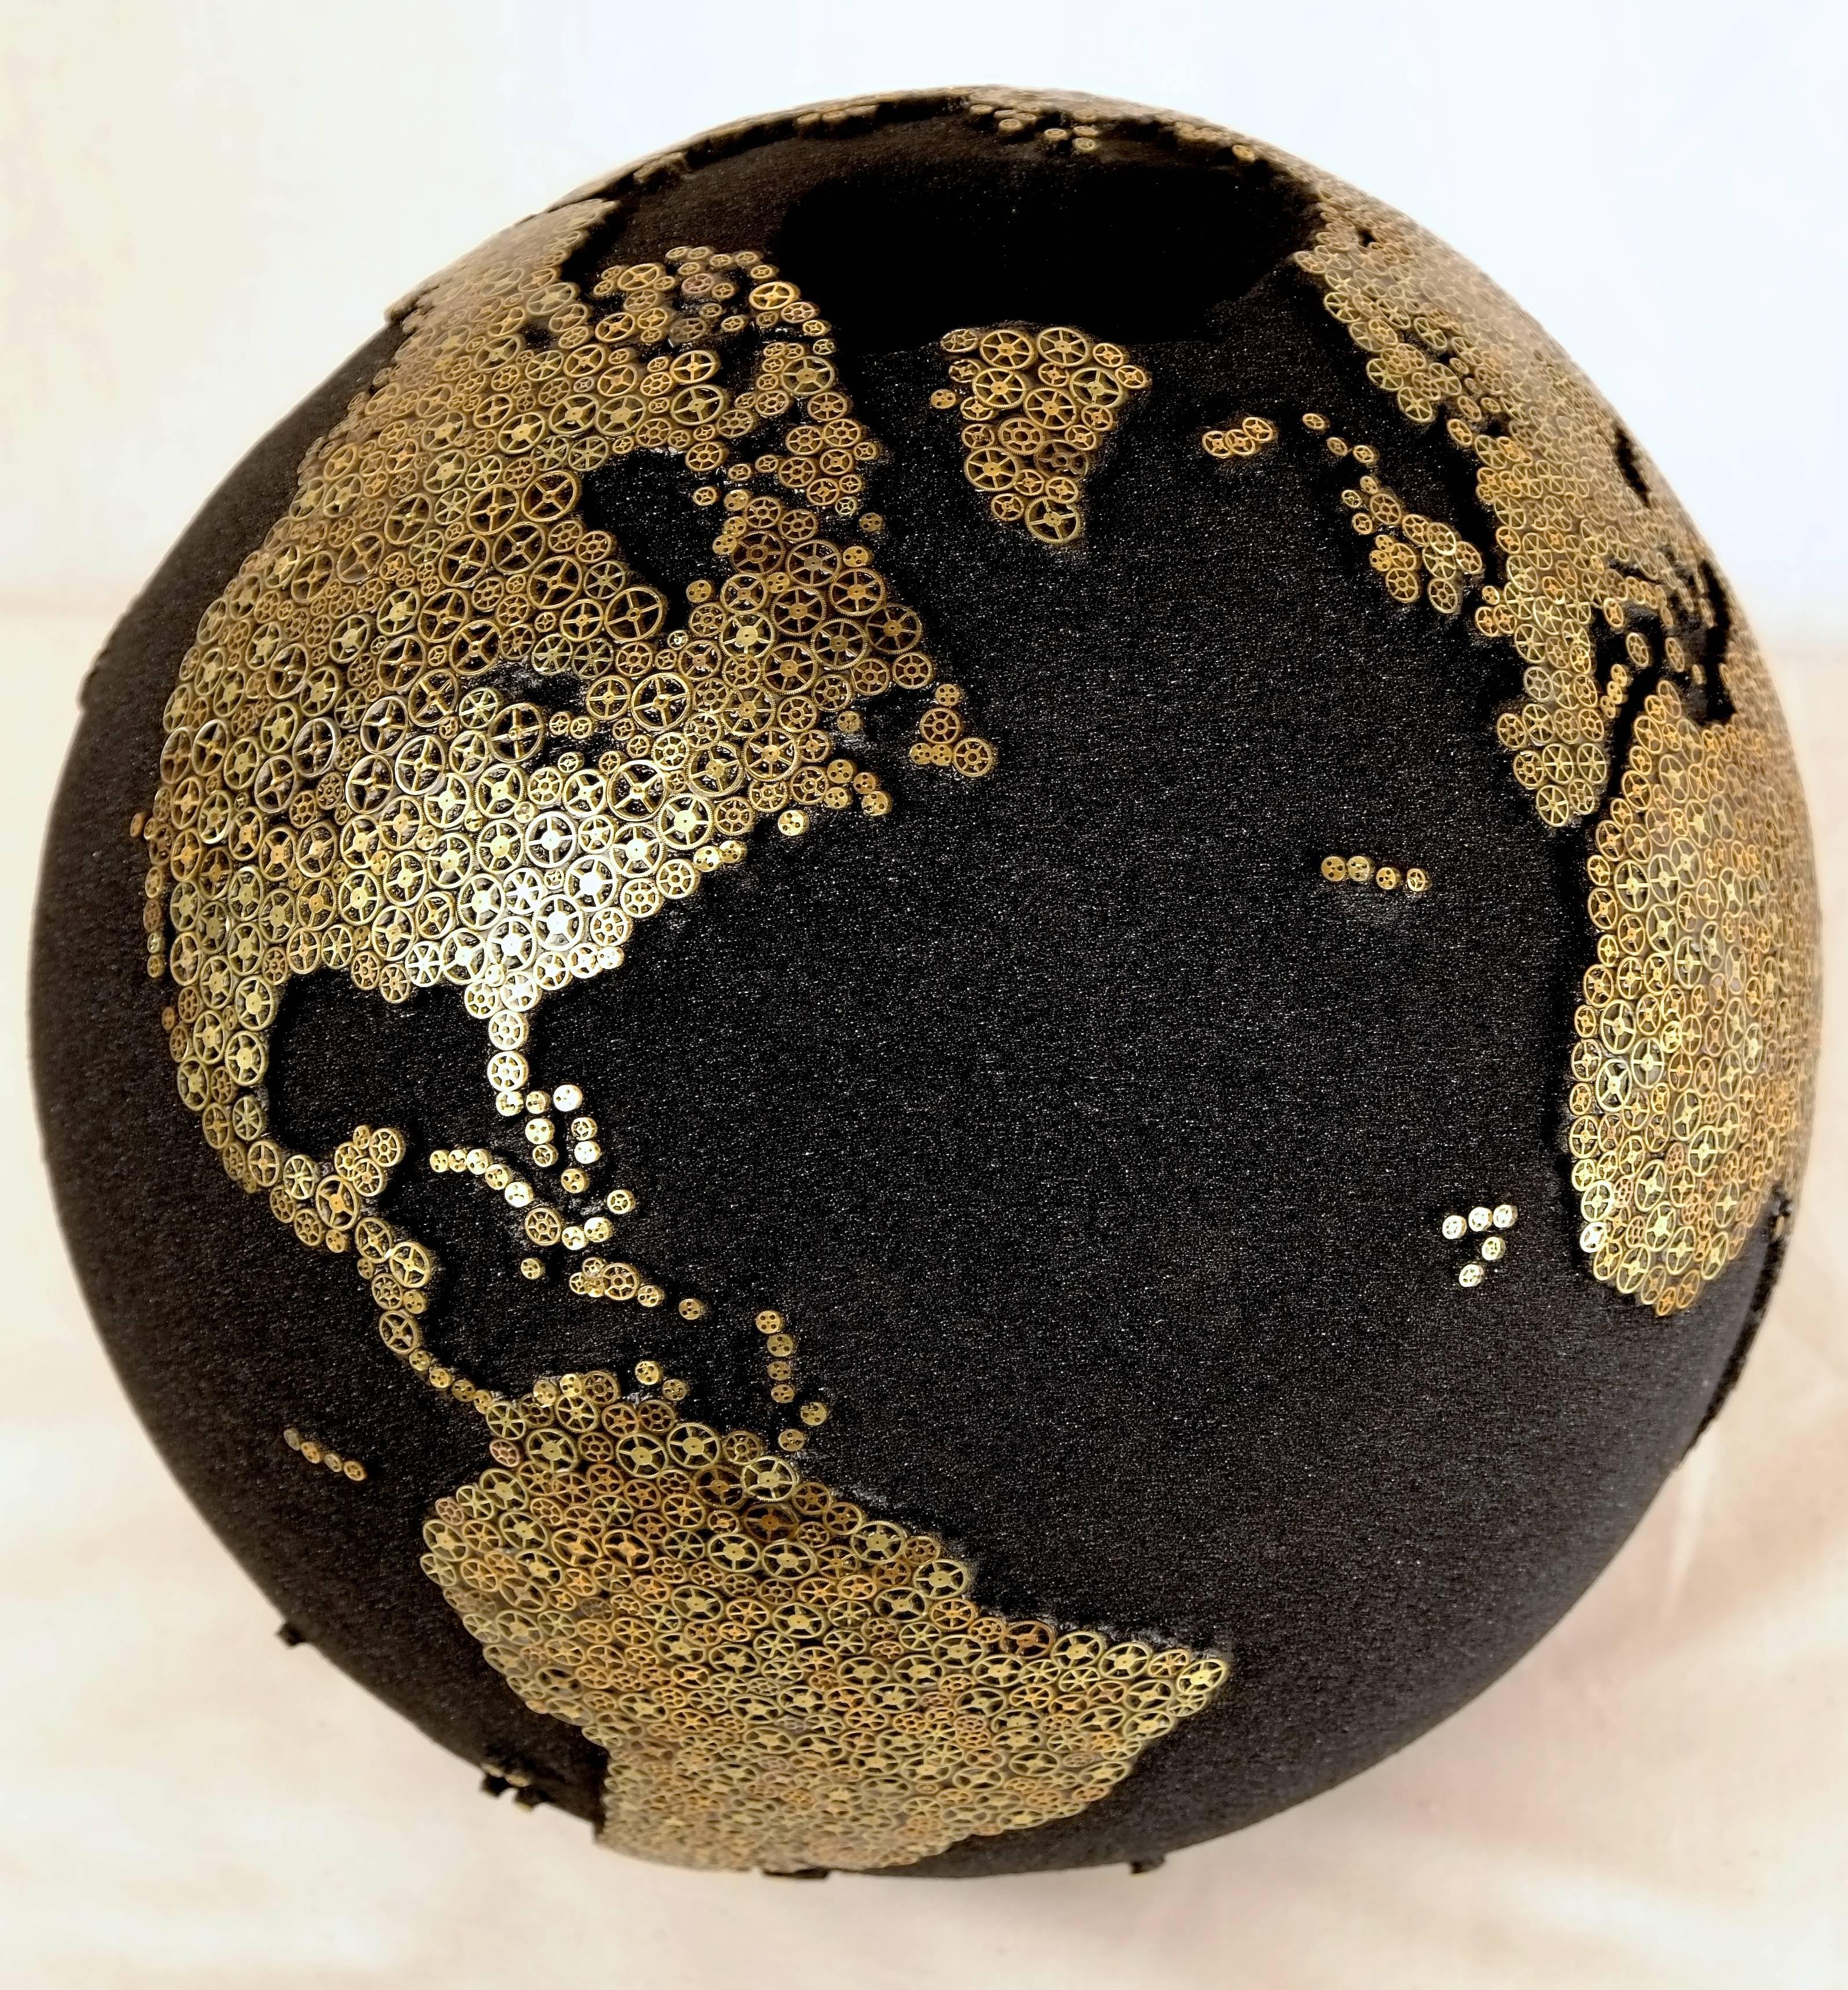 One of a kind 
Wooden teak root globe 
Diameter 30 cm 
Turning base 
Hand-carved 
Volcanic black sand 
Thousands watch mechanisms inlayed.
 